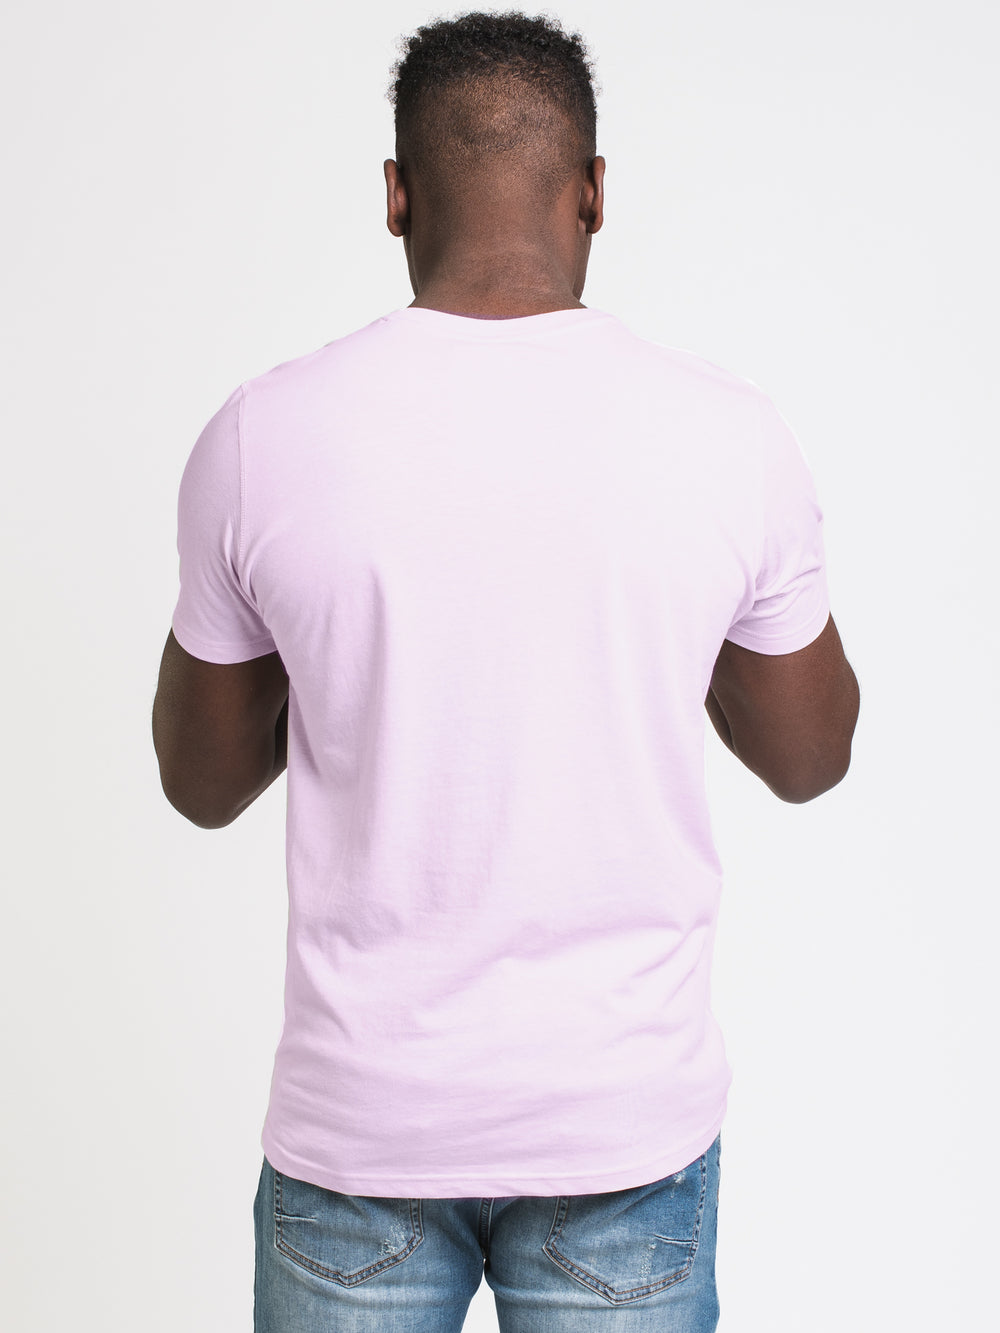 BOATHOUSE VICTOR V-NECK TEE - CLEARANCE